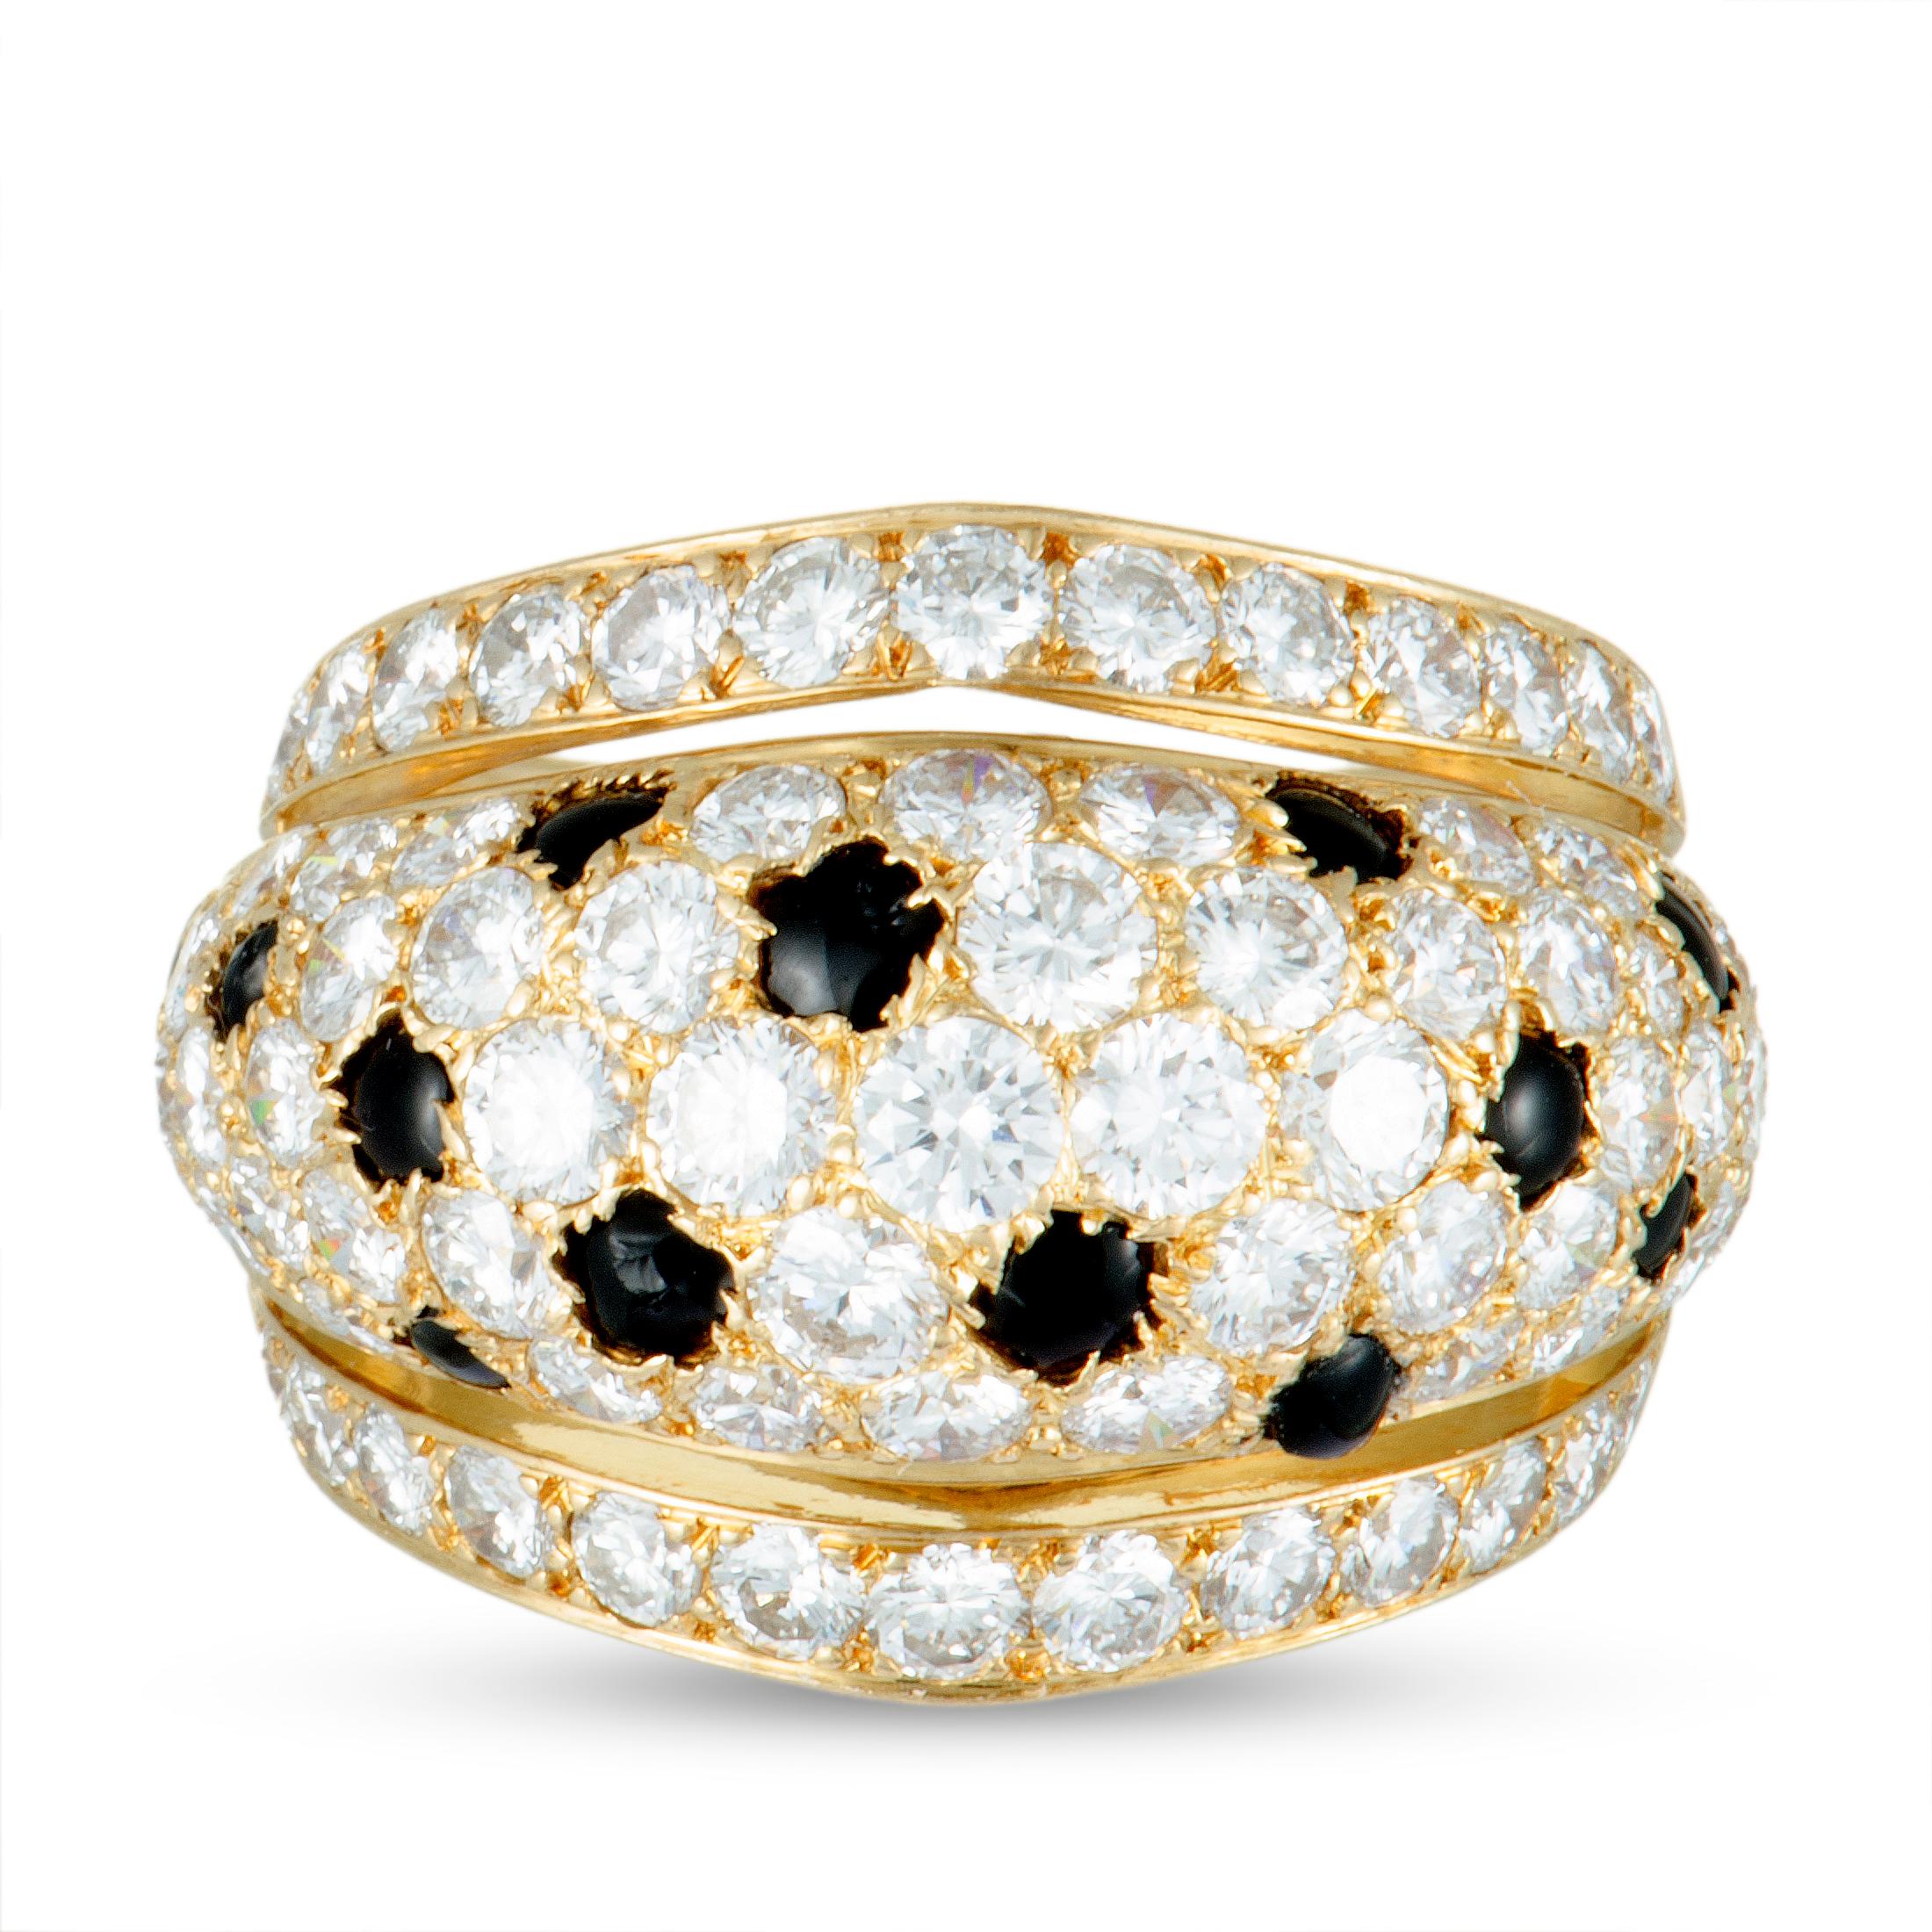 Cartier Nigeria Diamond and Onyx Pave Yellow Gold Wide Band Ring 1